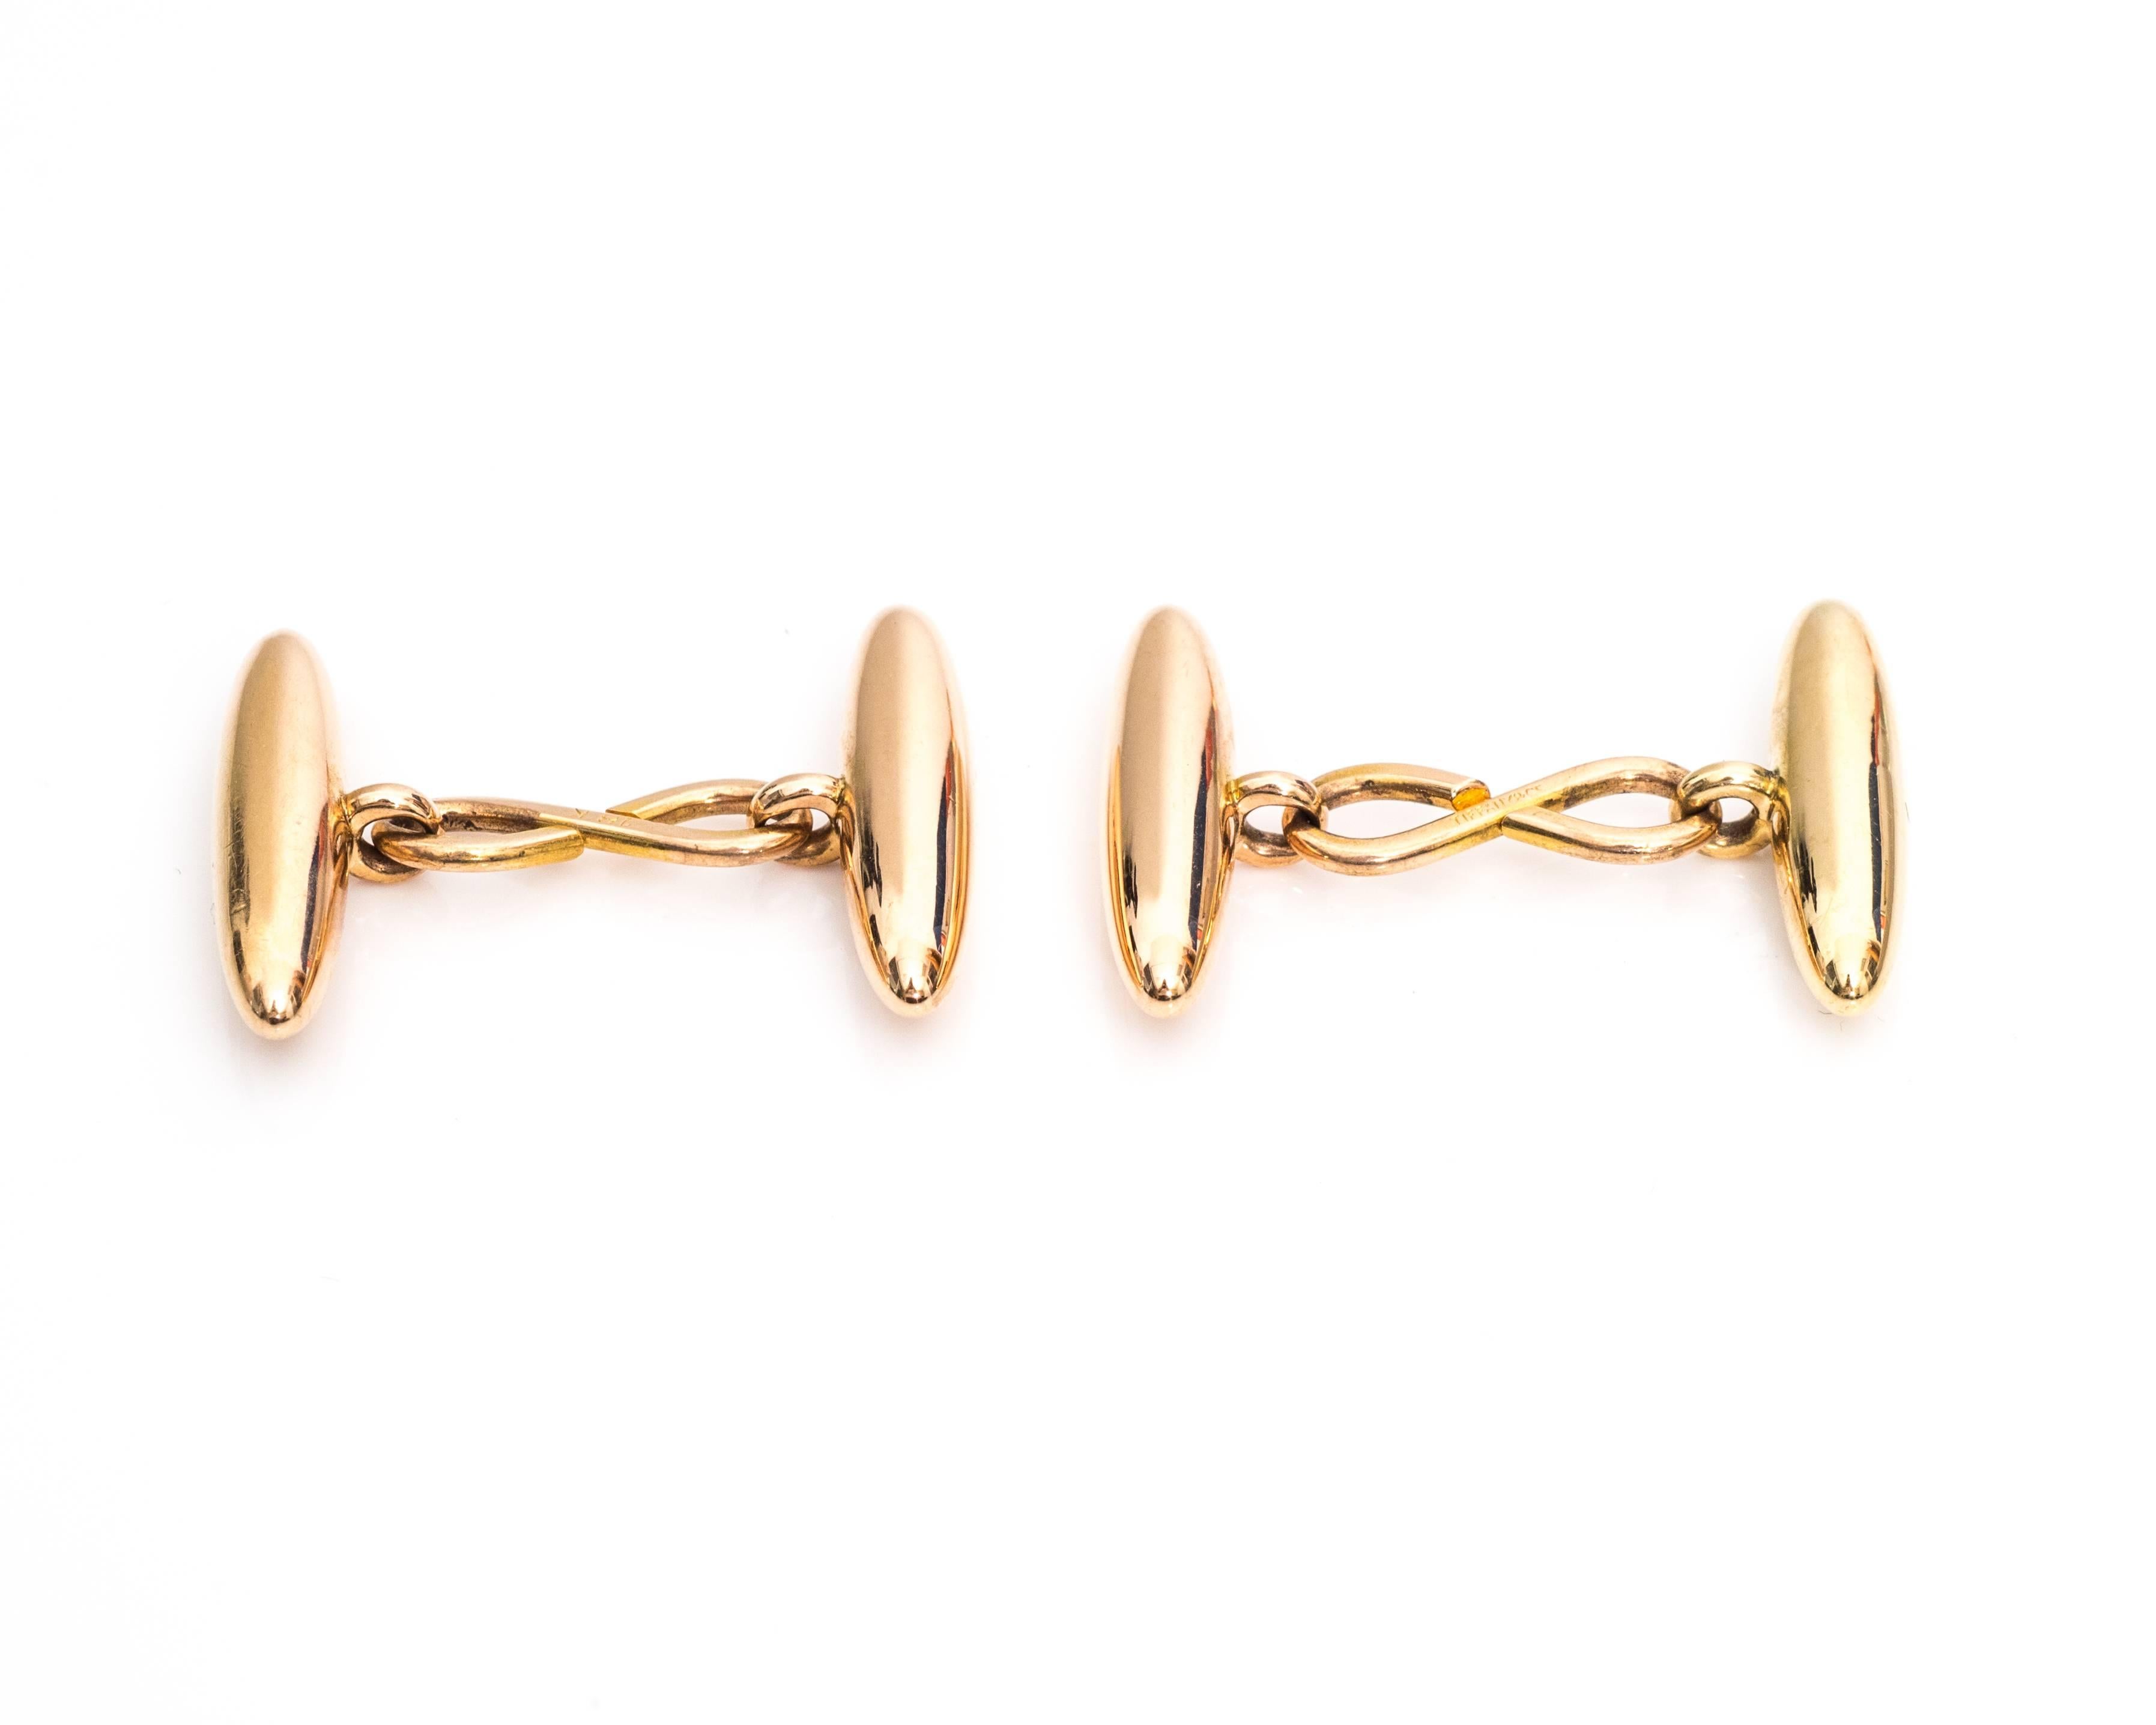 Absolutely Stunning 1950s Tiffany & Co. Cufflinks
Crafted in 18 Karat Yellow Gold with Strong Rose Patina
Features a Long Marquise Shaped Cylinder that connects to a Classic Toggle Style Link
Each Cufflink is Hallmarked 18KT and TIFFANY AND CO 